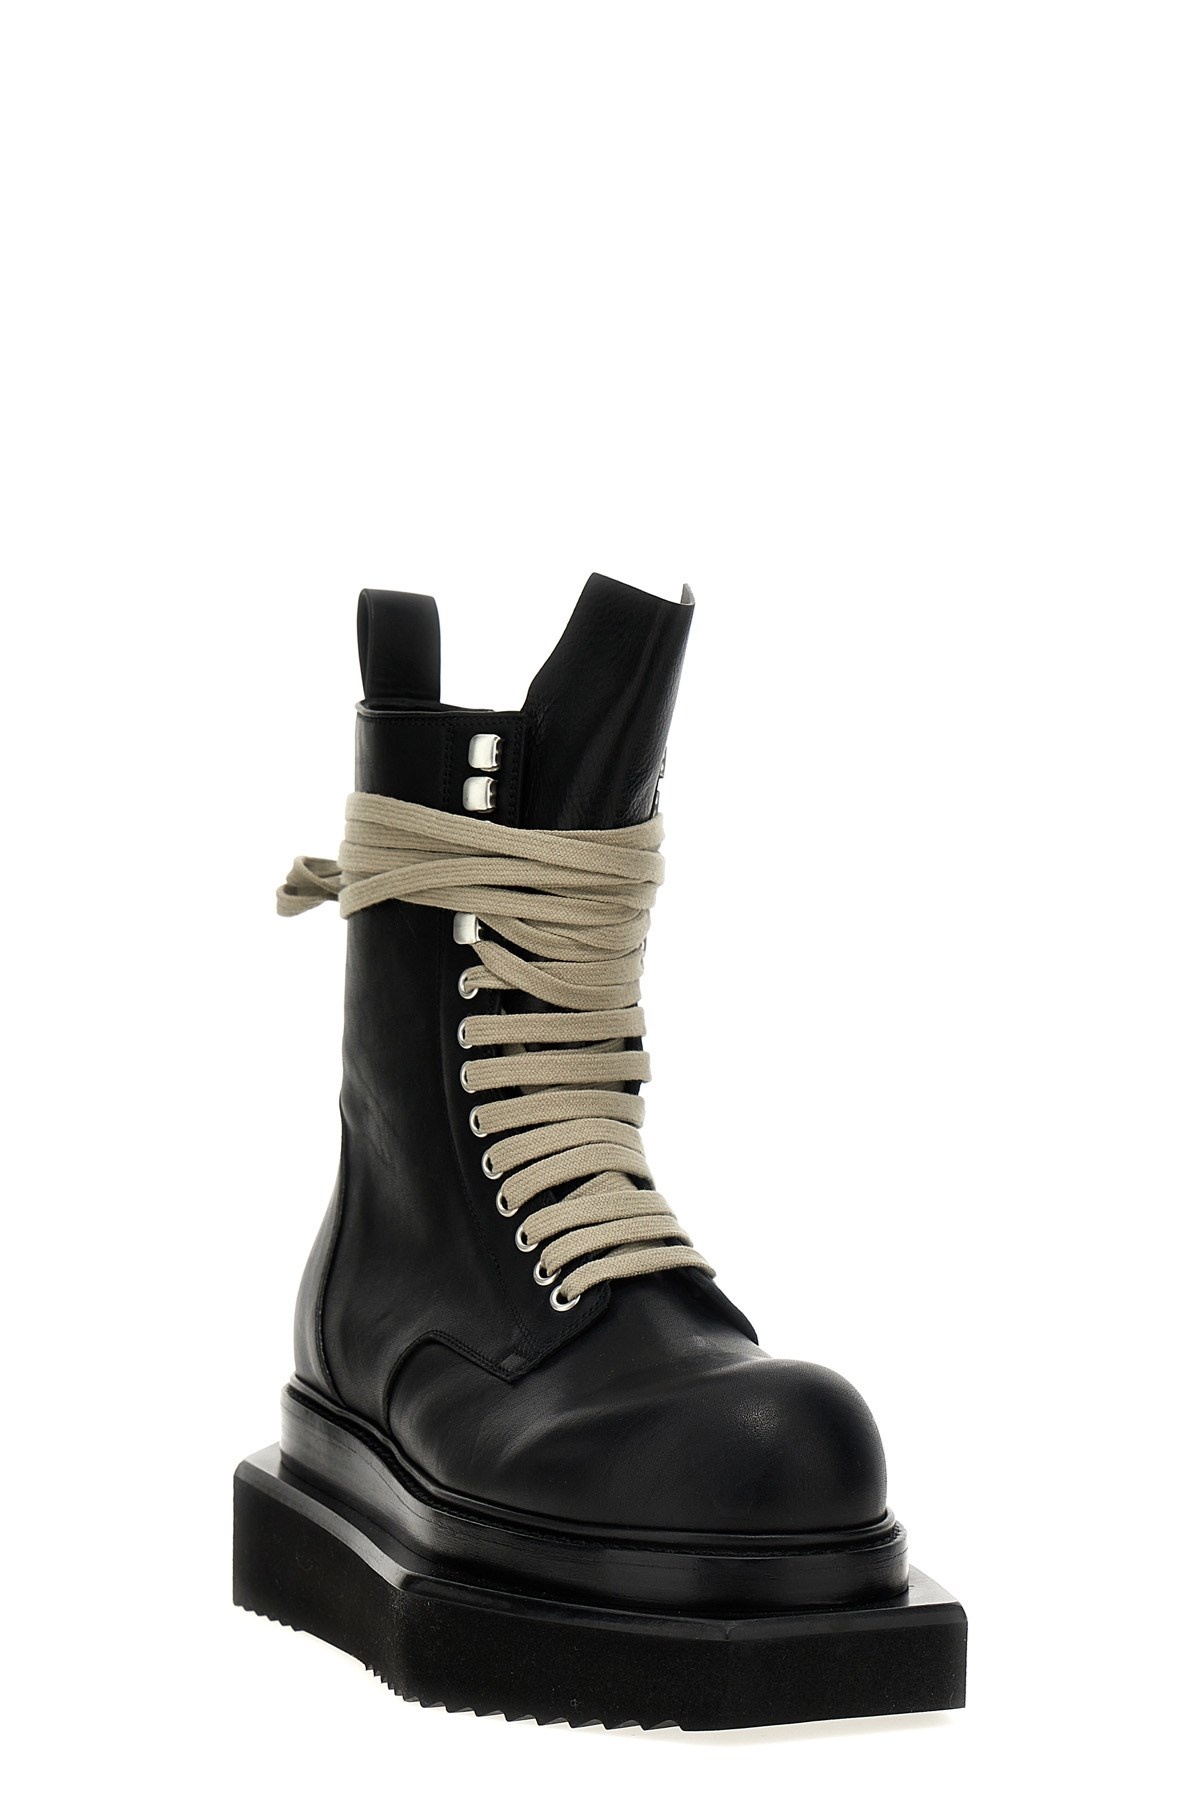 'Laceup Turbo Cyclops' boots - 2